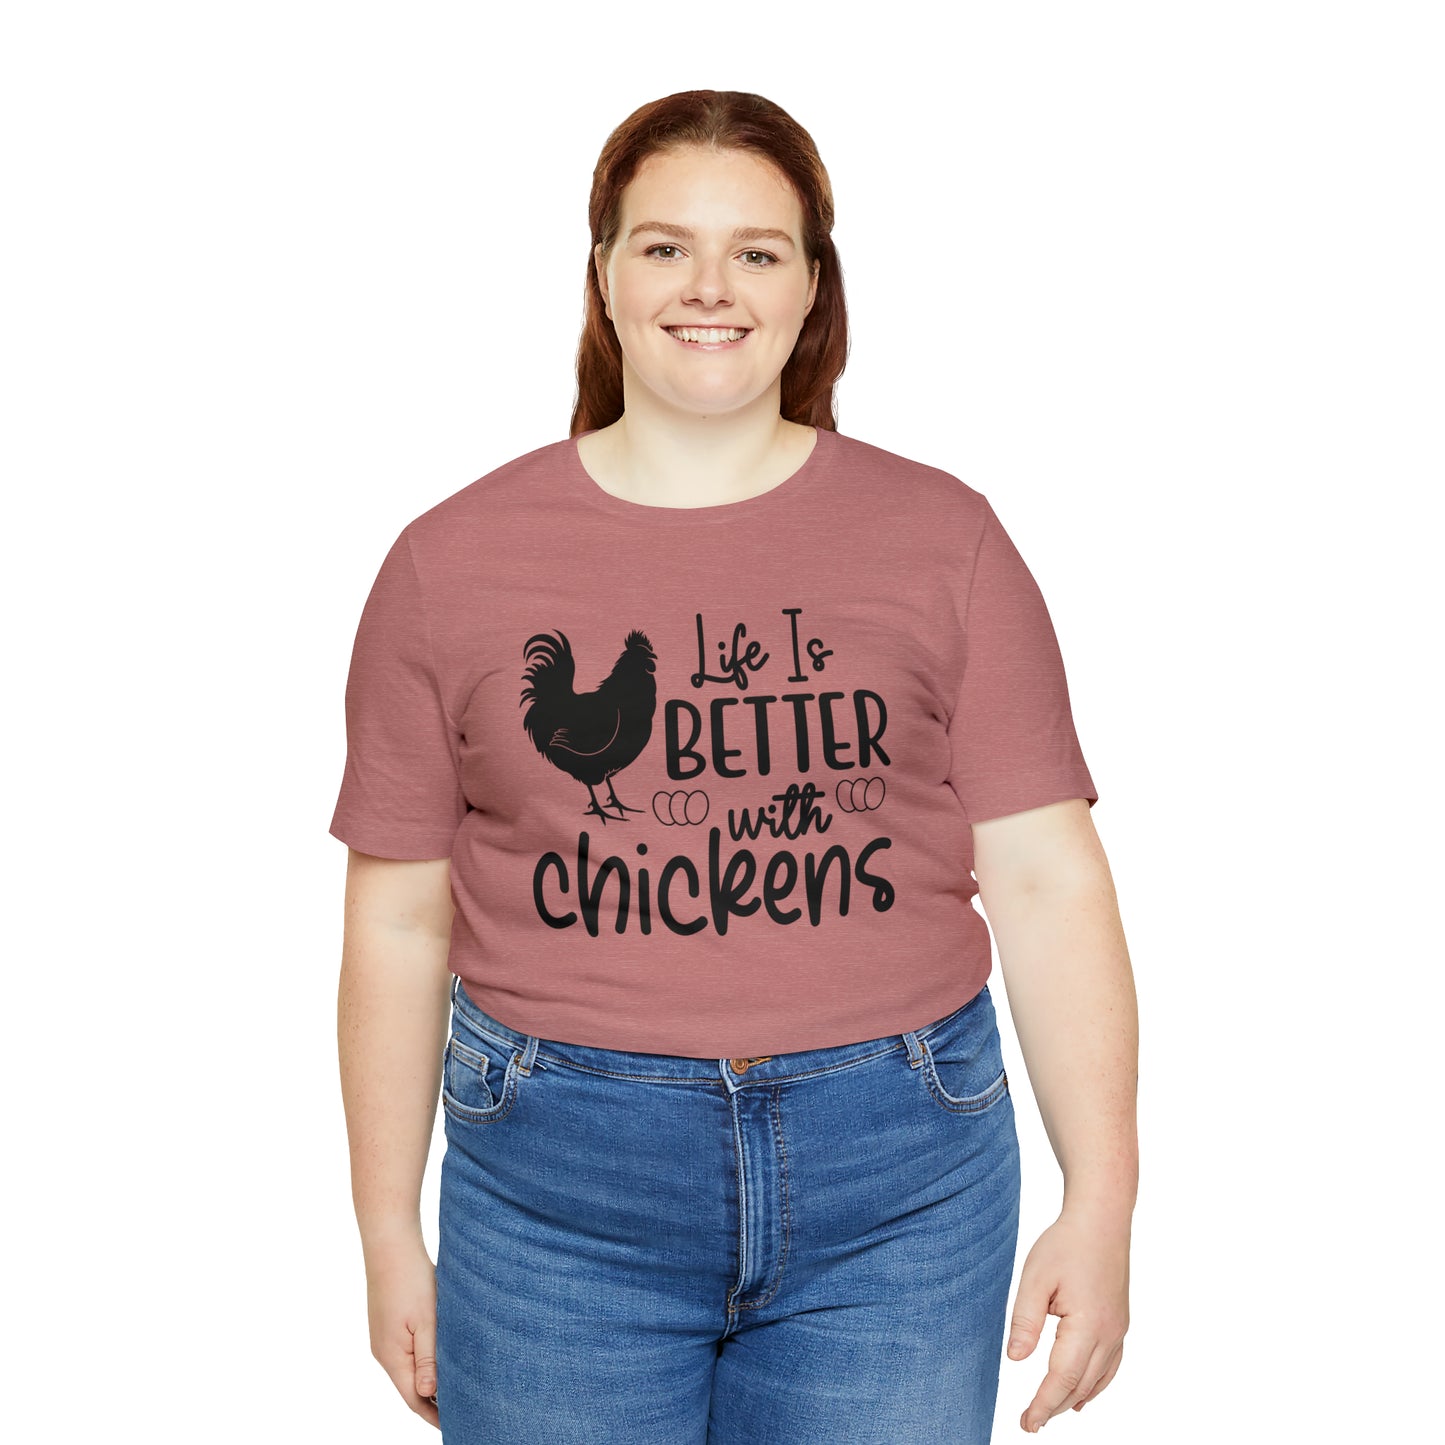 Life Is Better With Chickens Short Sleeve T-shirt